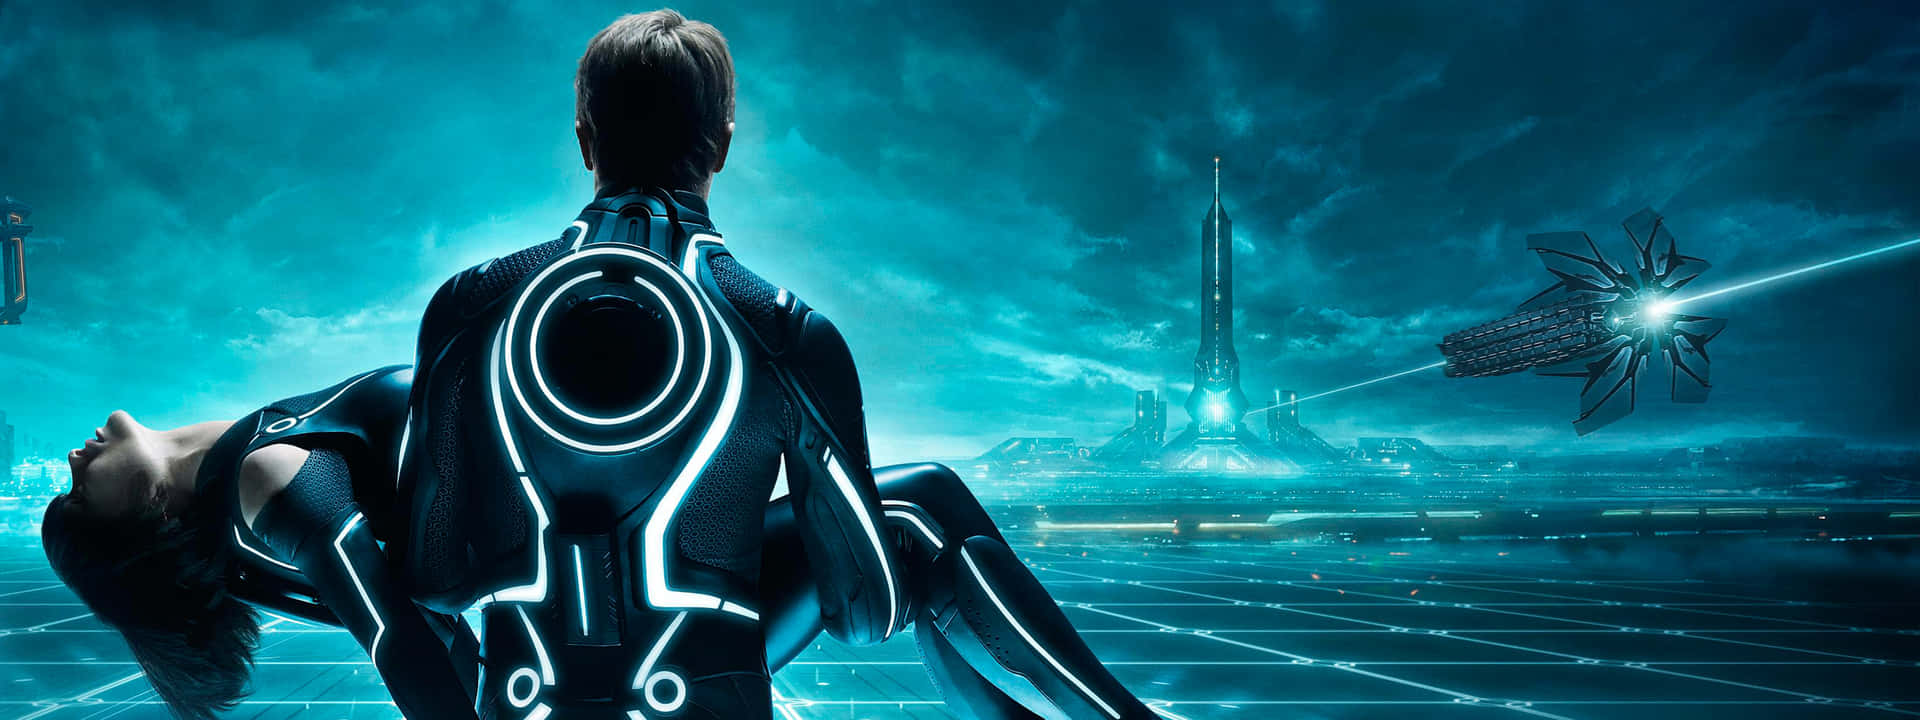 Tron The Game - Hd Wallpapers Wallpaper